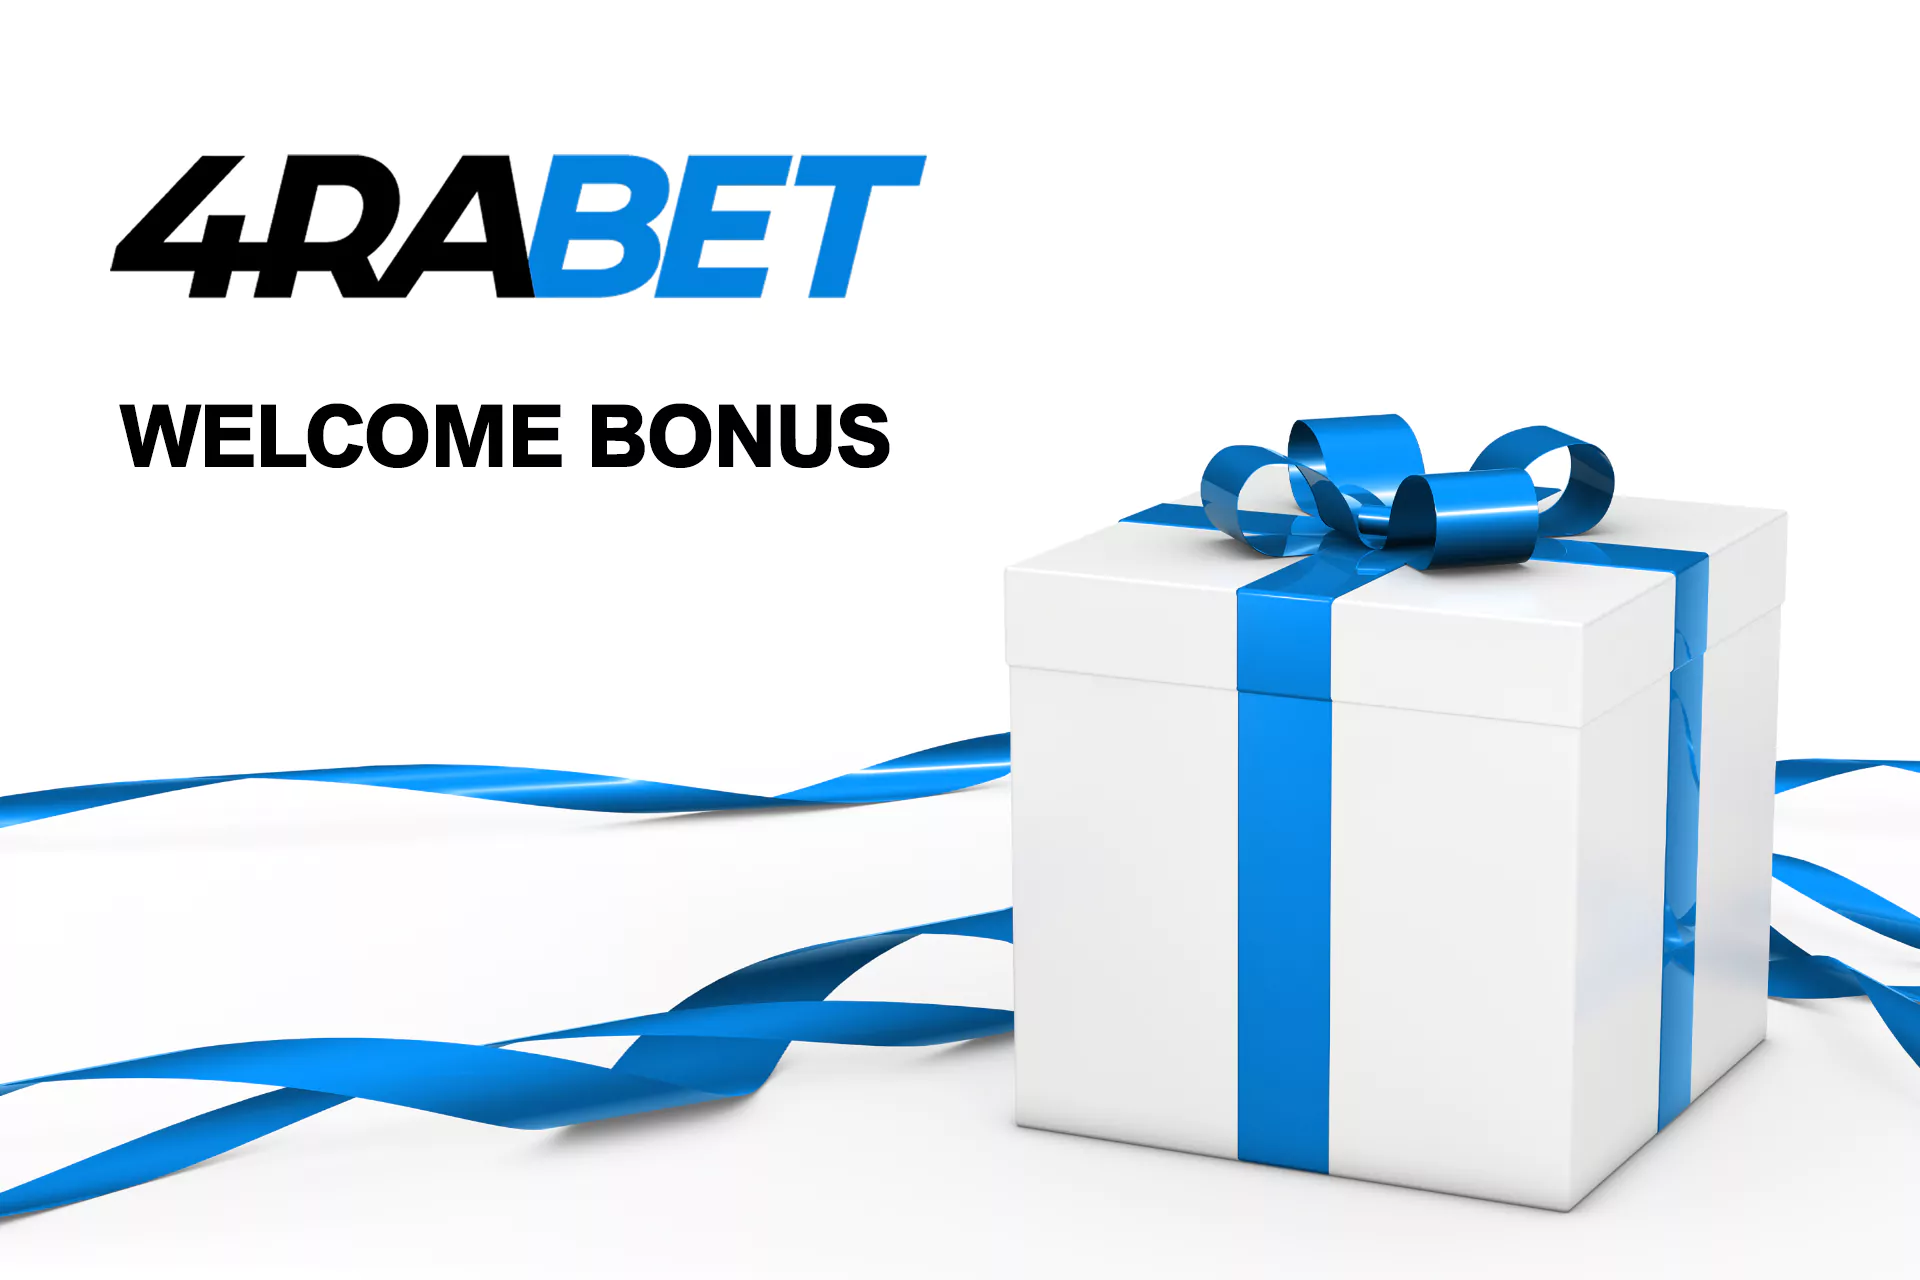 If you are a new user, don't forget to claim a welcome bonus from the bookmaker.